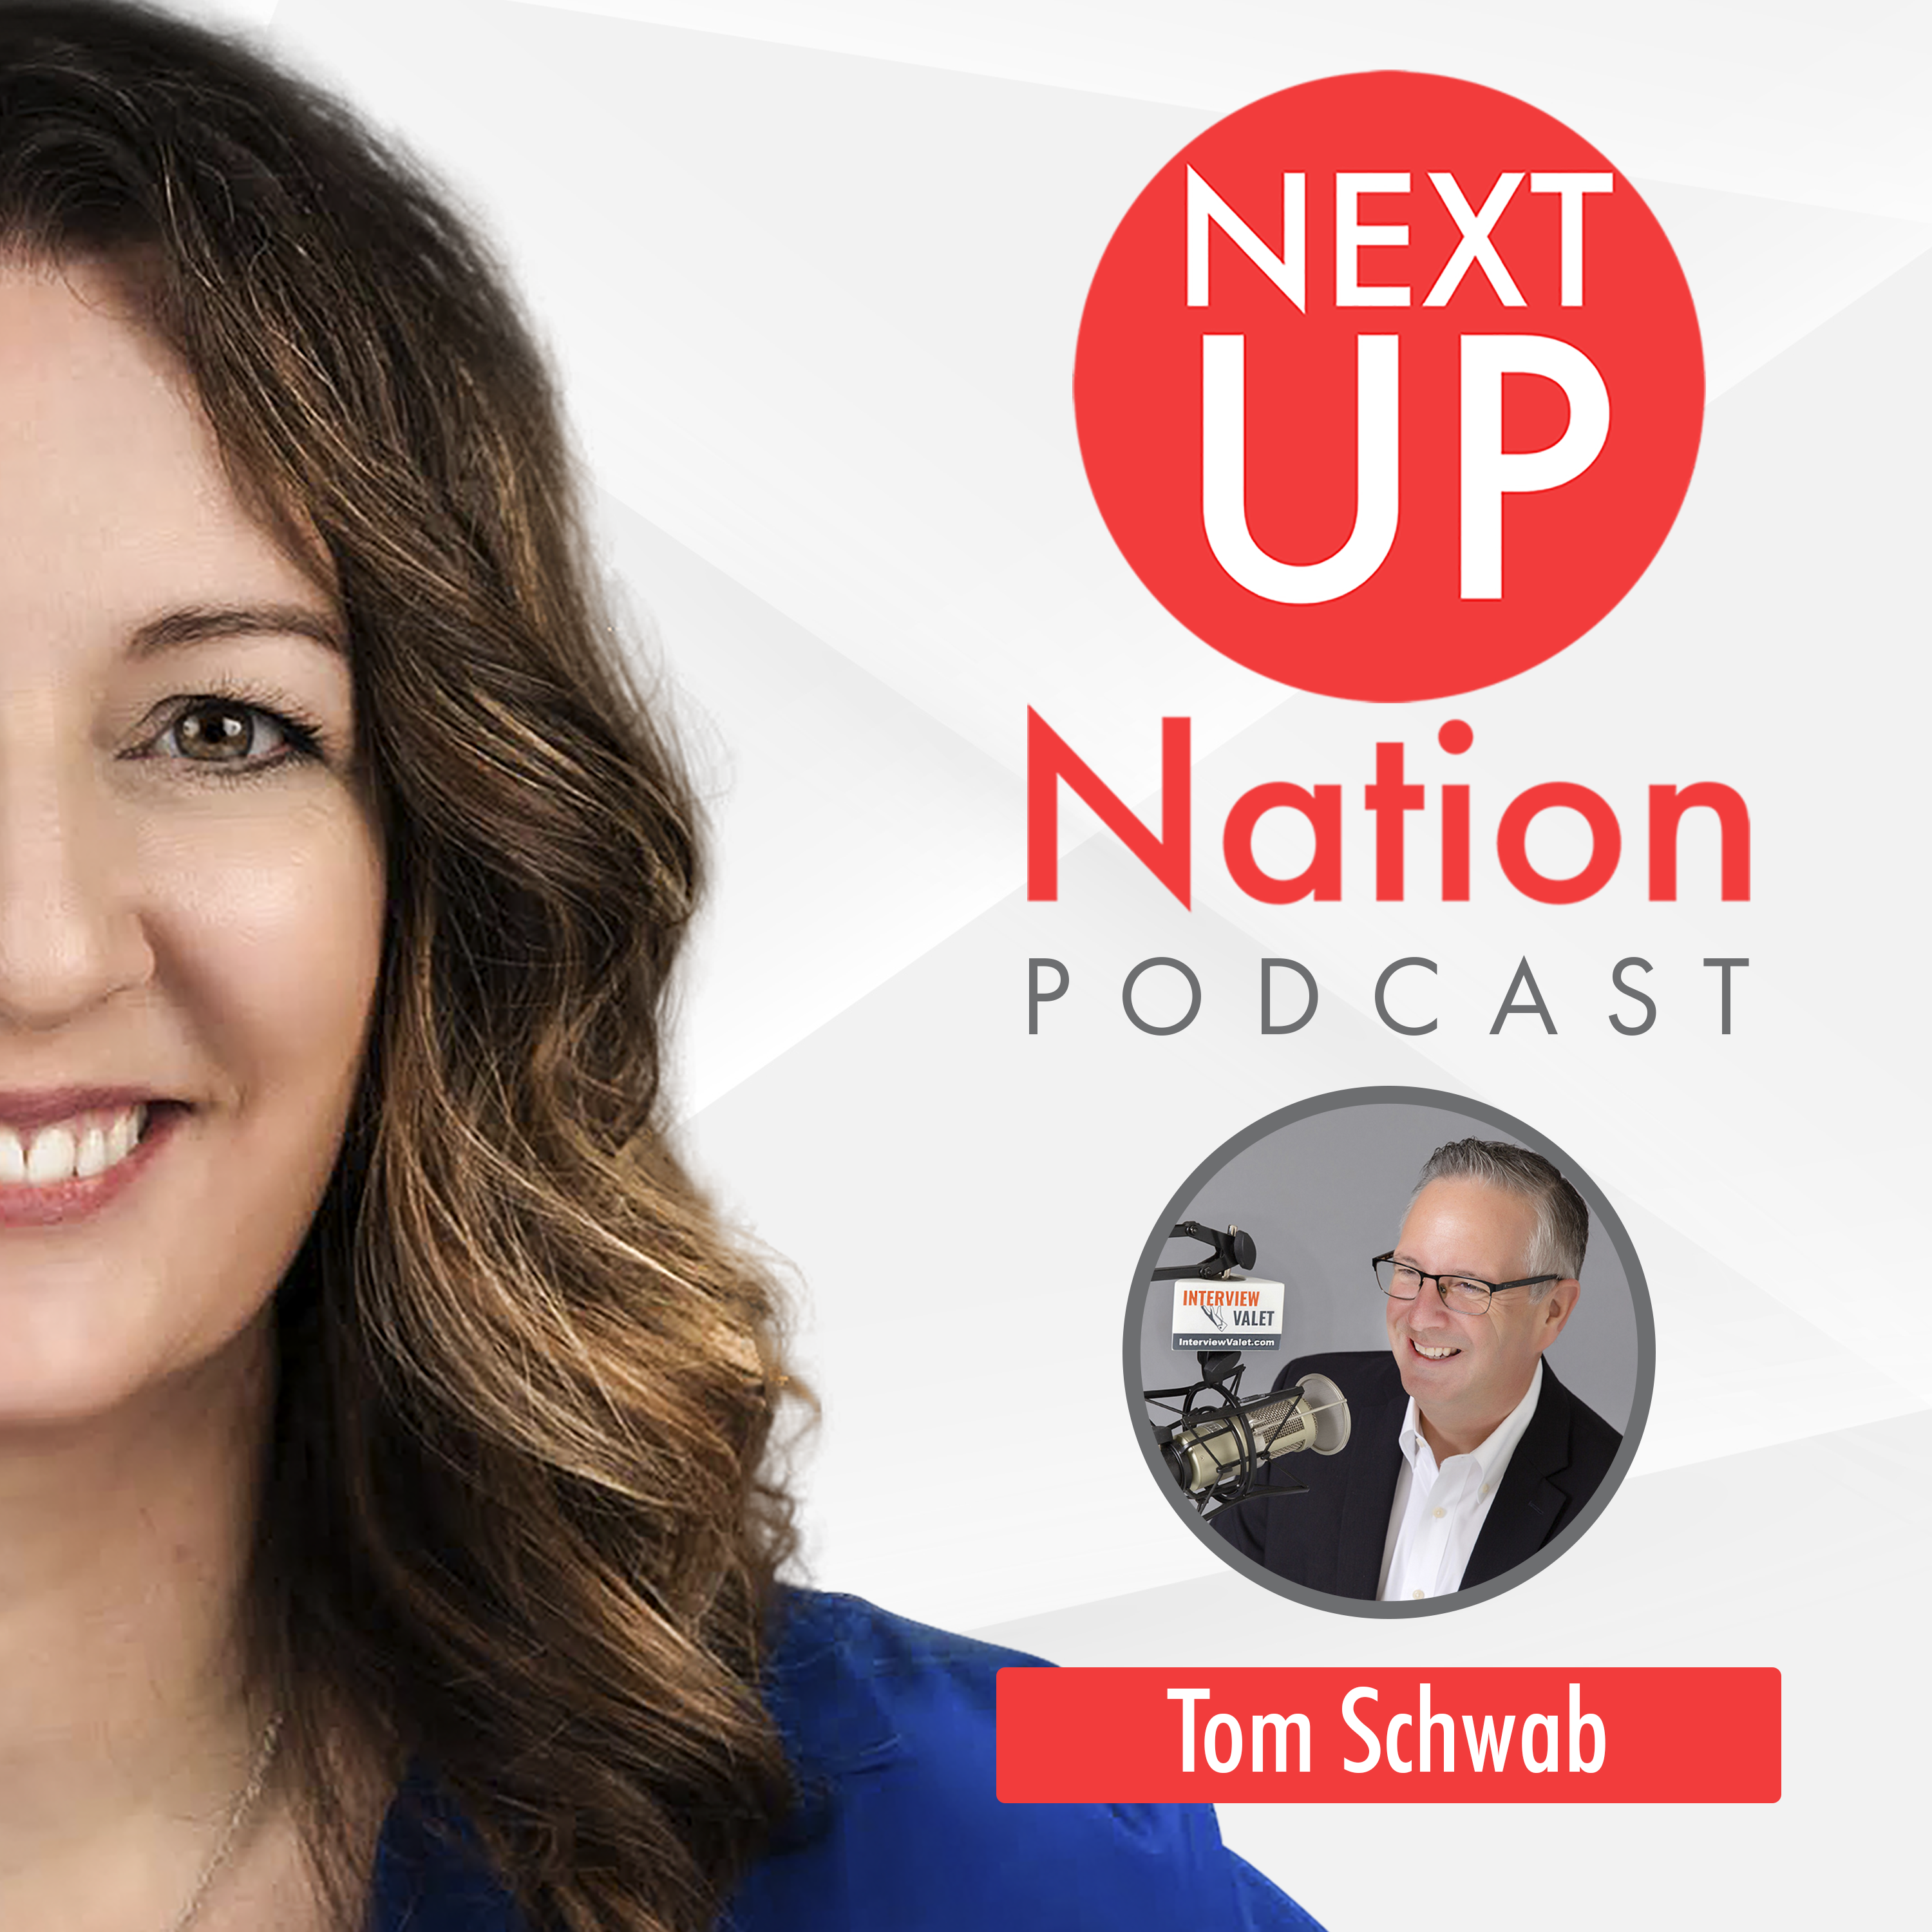 Cash in on Other People’s Podcasts - Interview with Tom Schwab